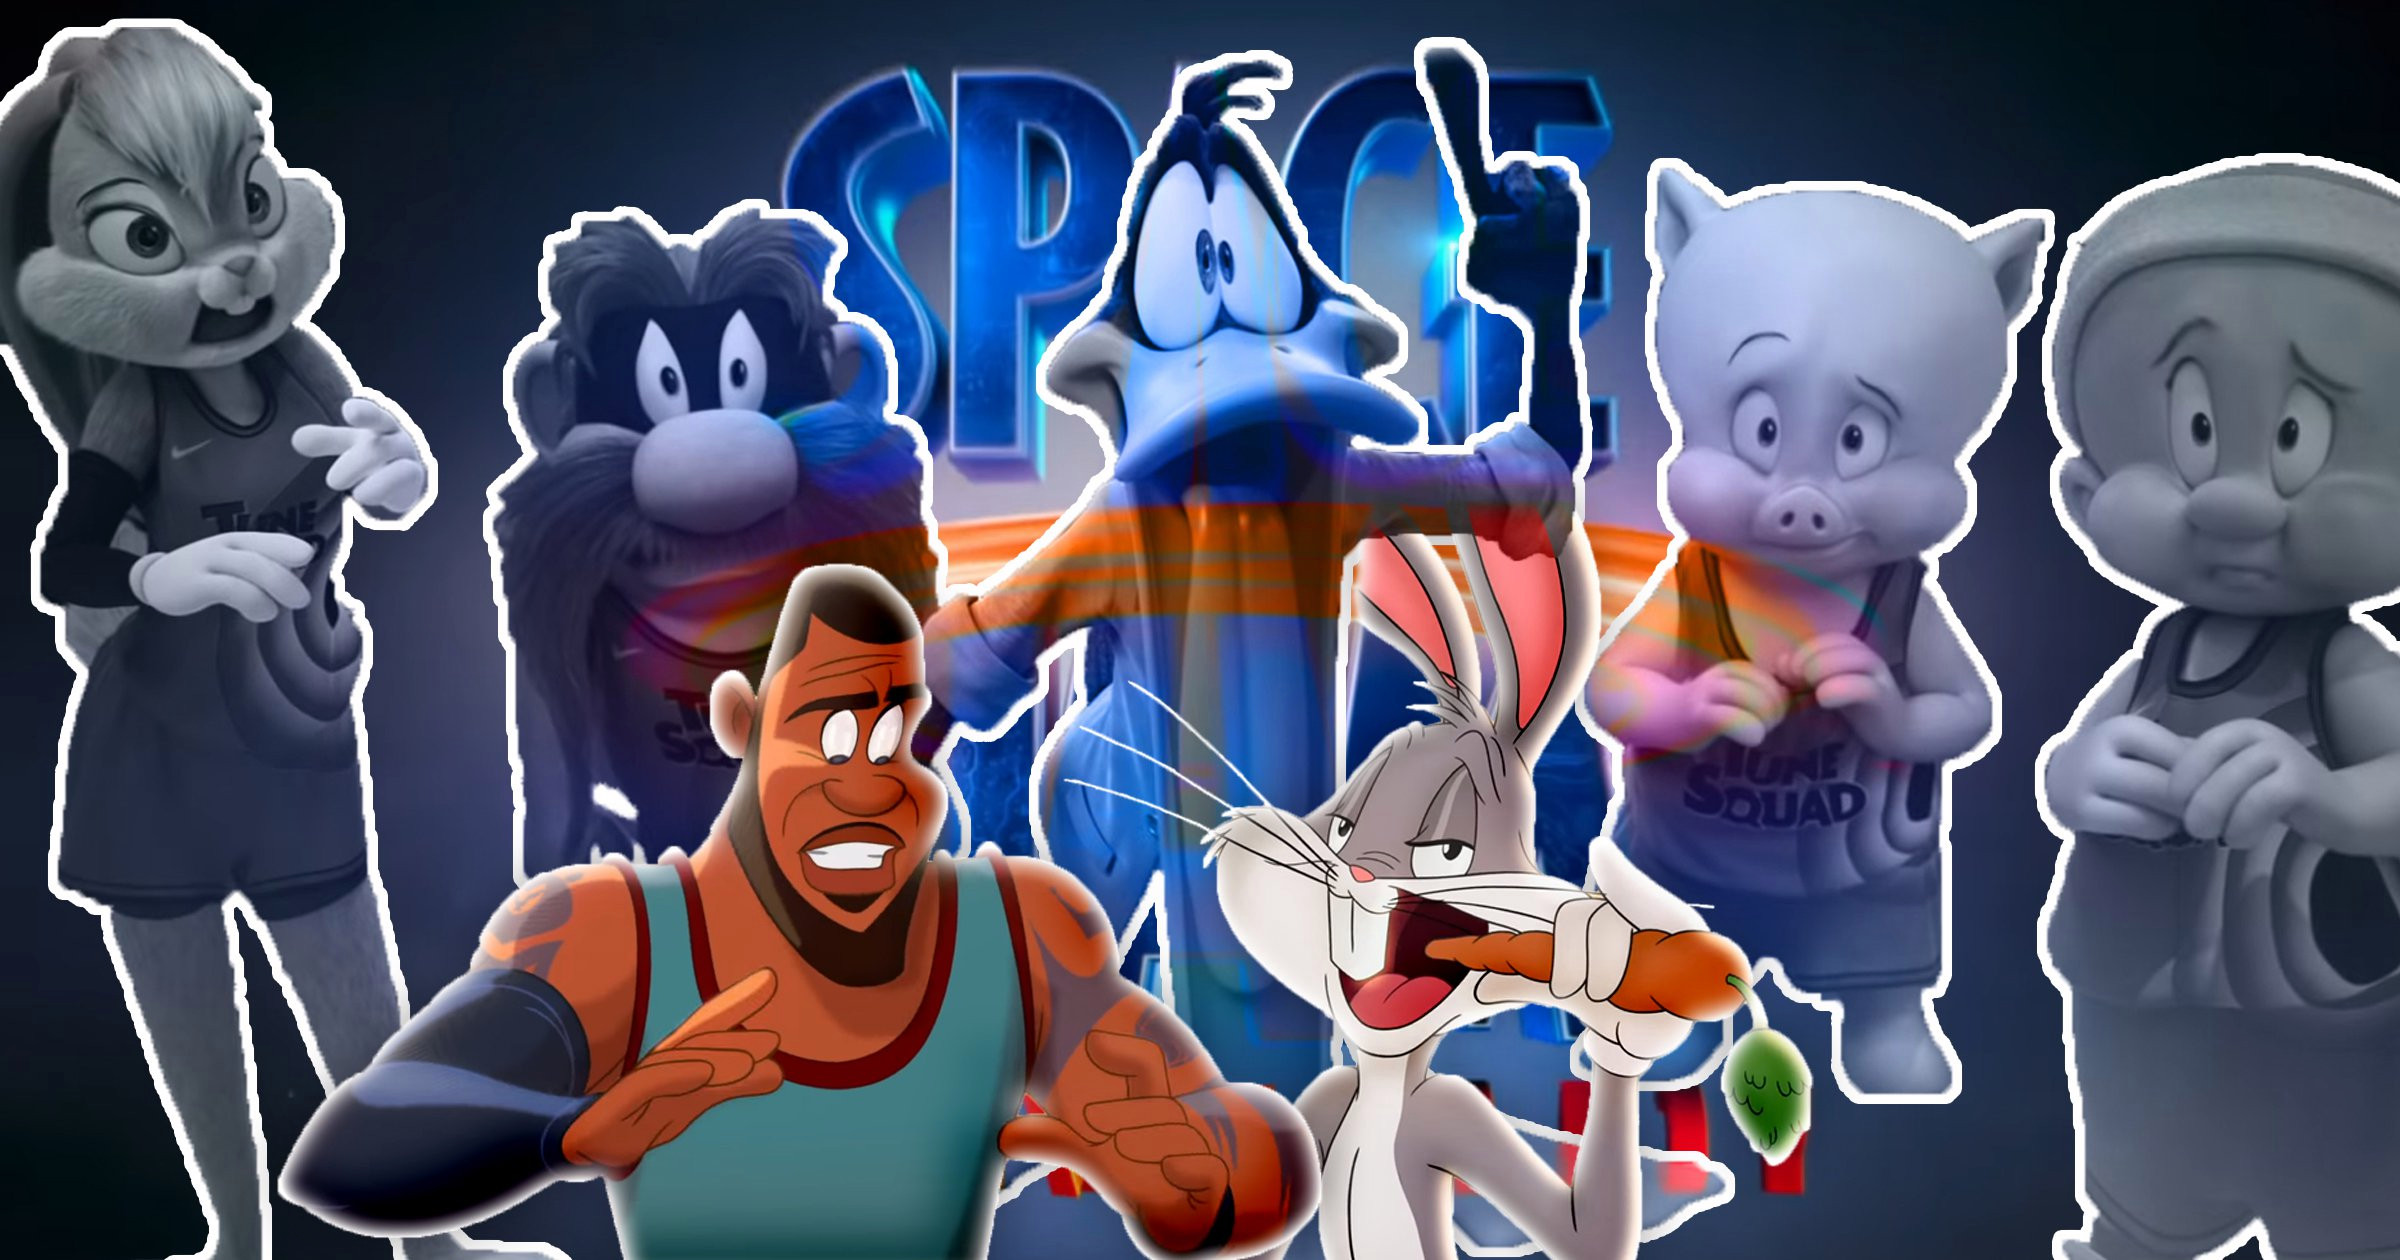 Space Jam A New Legacy Watch This Exciting Trailer For The Movie Film Daily